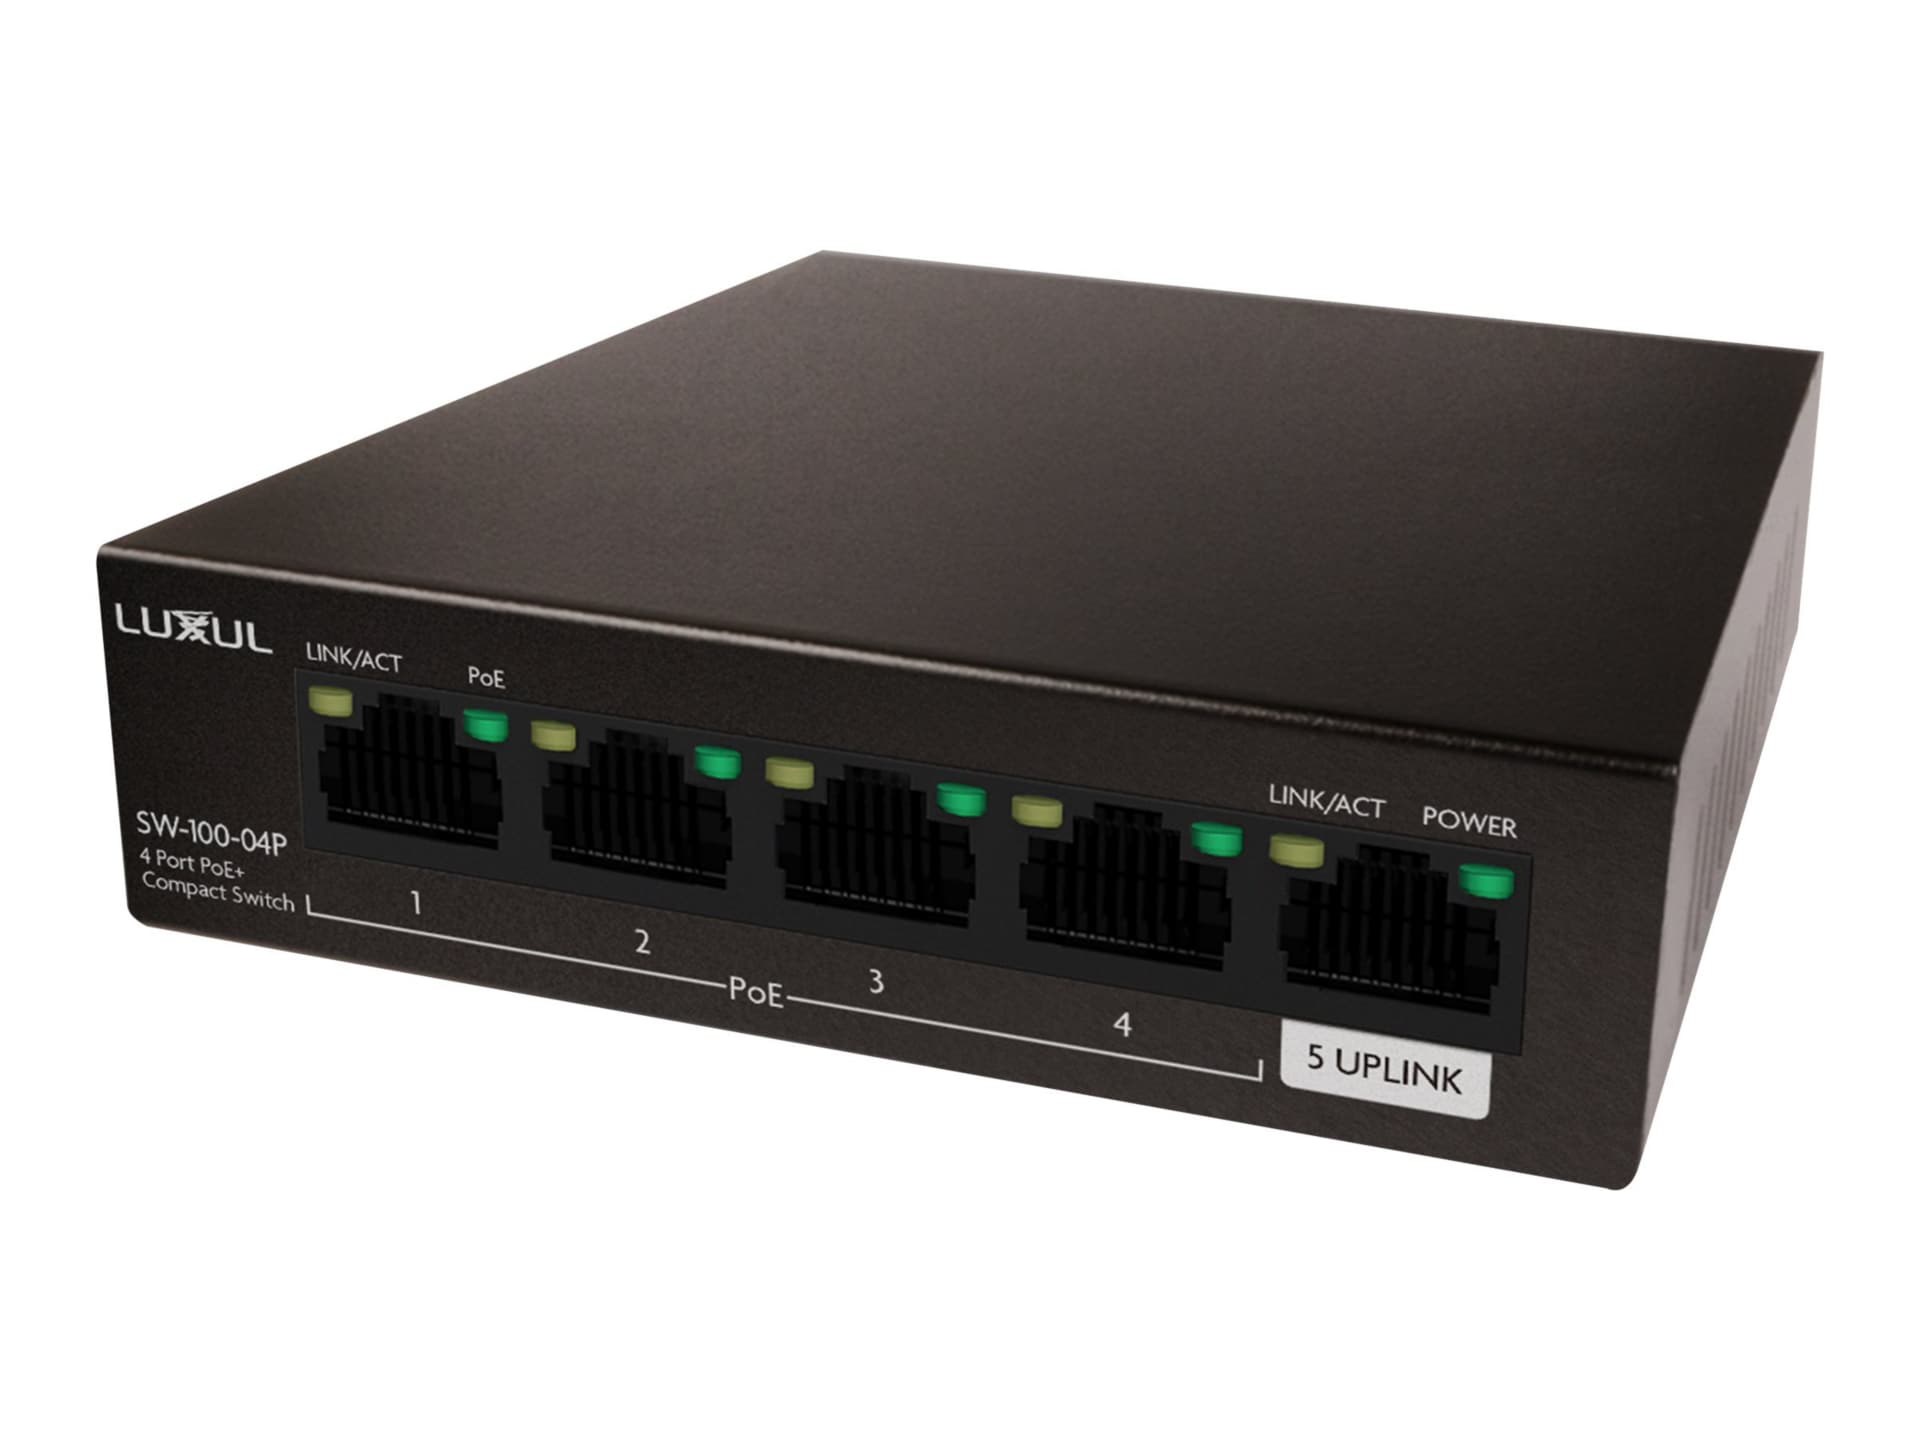 Luxul SW-100-04P - switch - 4 ports - unmanaged